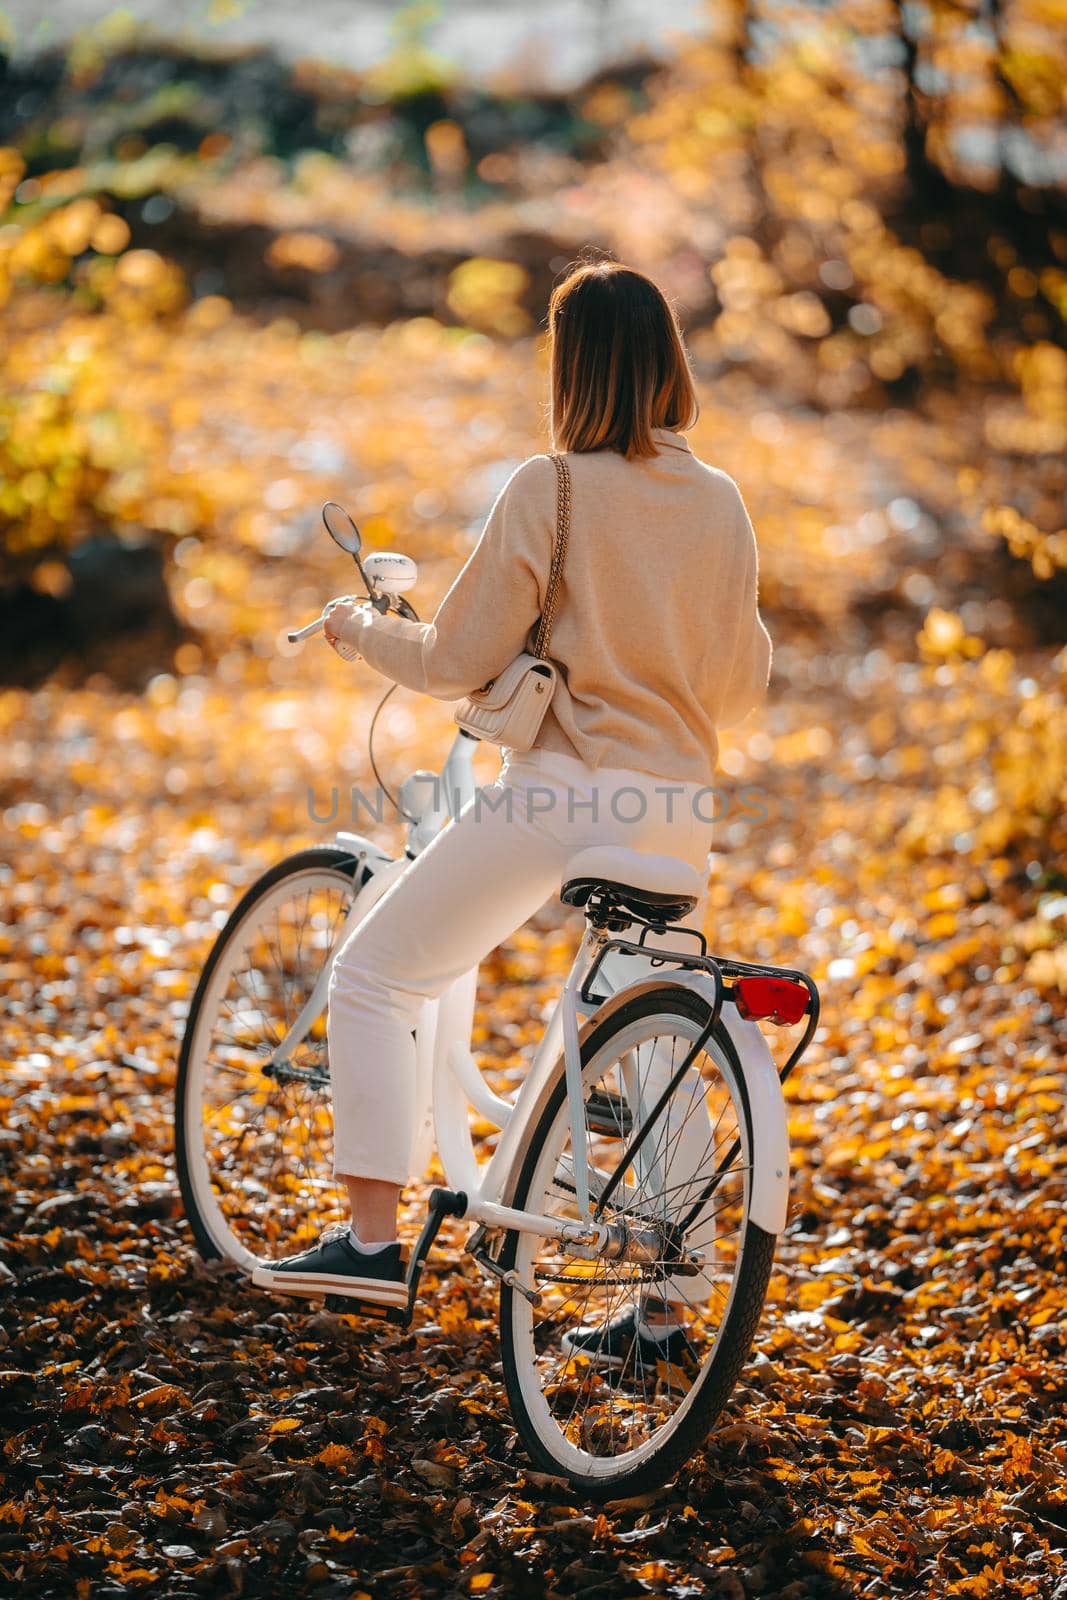 Beautiful portrait of woman cycling alone in autumn park. Sunny day, golden leaves in forest. Trendy lady on vintage white bicycle, healthy lifestyle, aesthetic scene. High quality photo